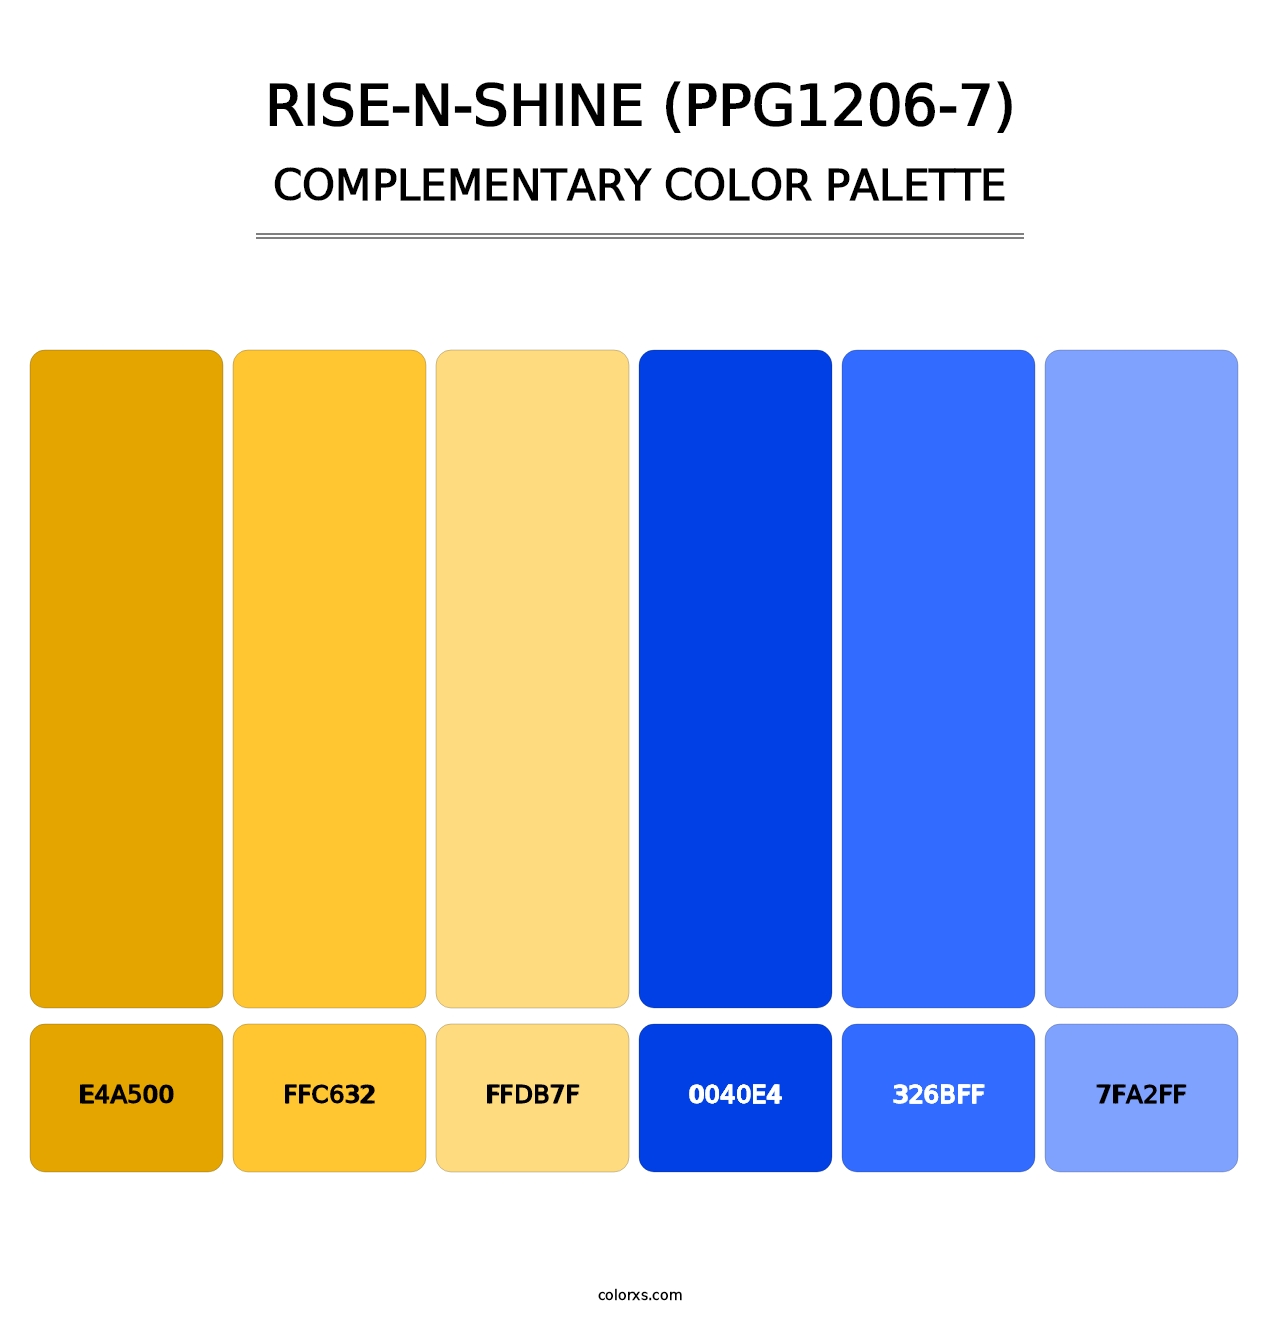 Rise-N-Shine (PPG1206-7) - Complementary Color Palette